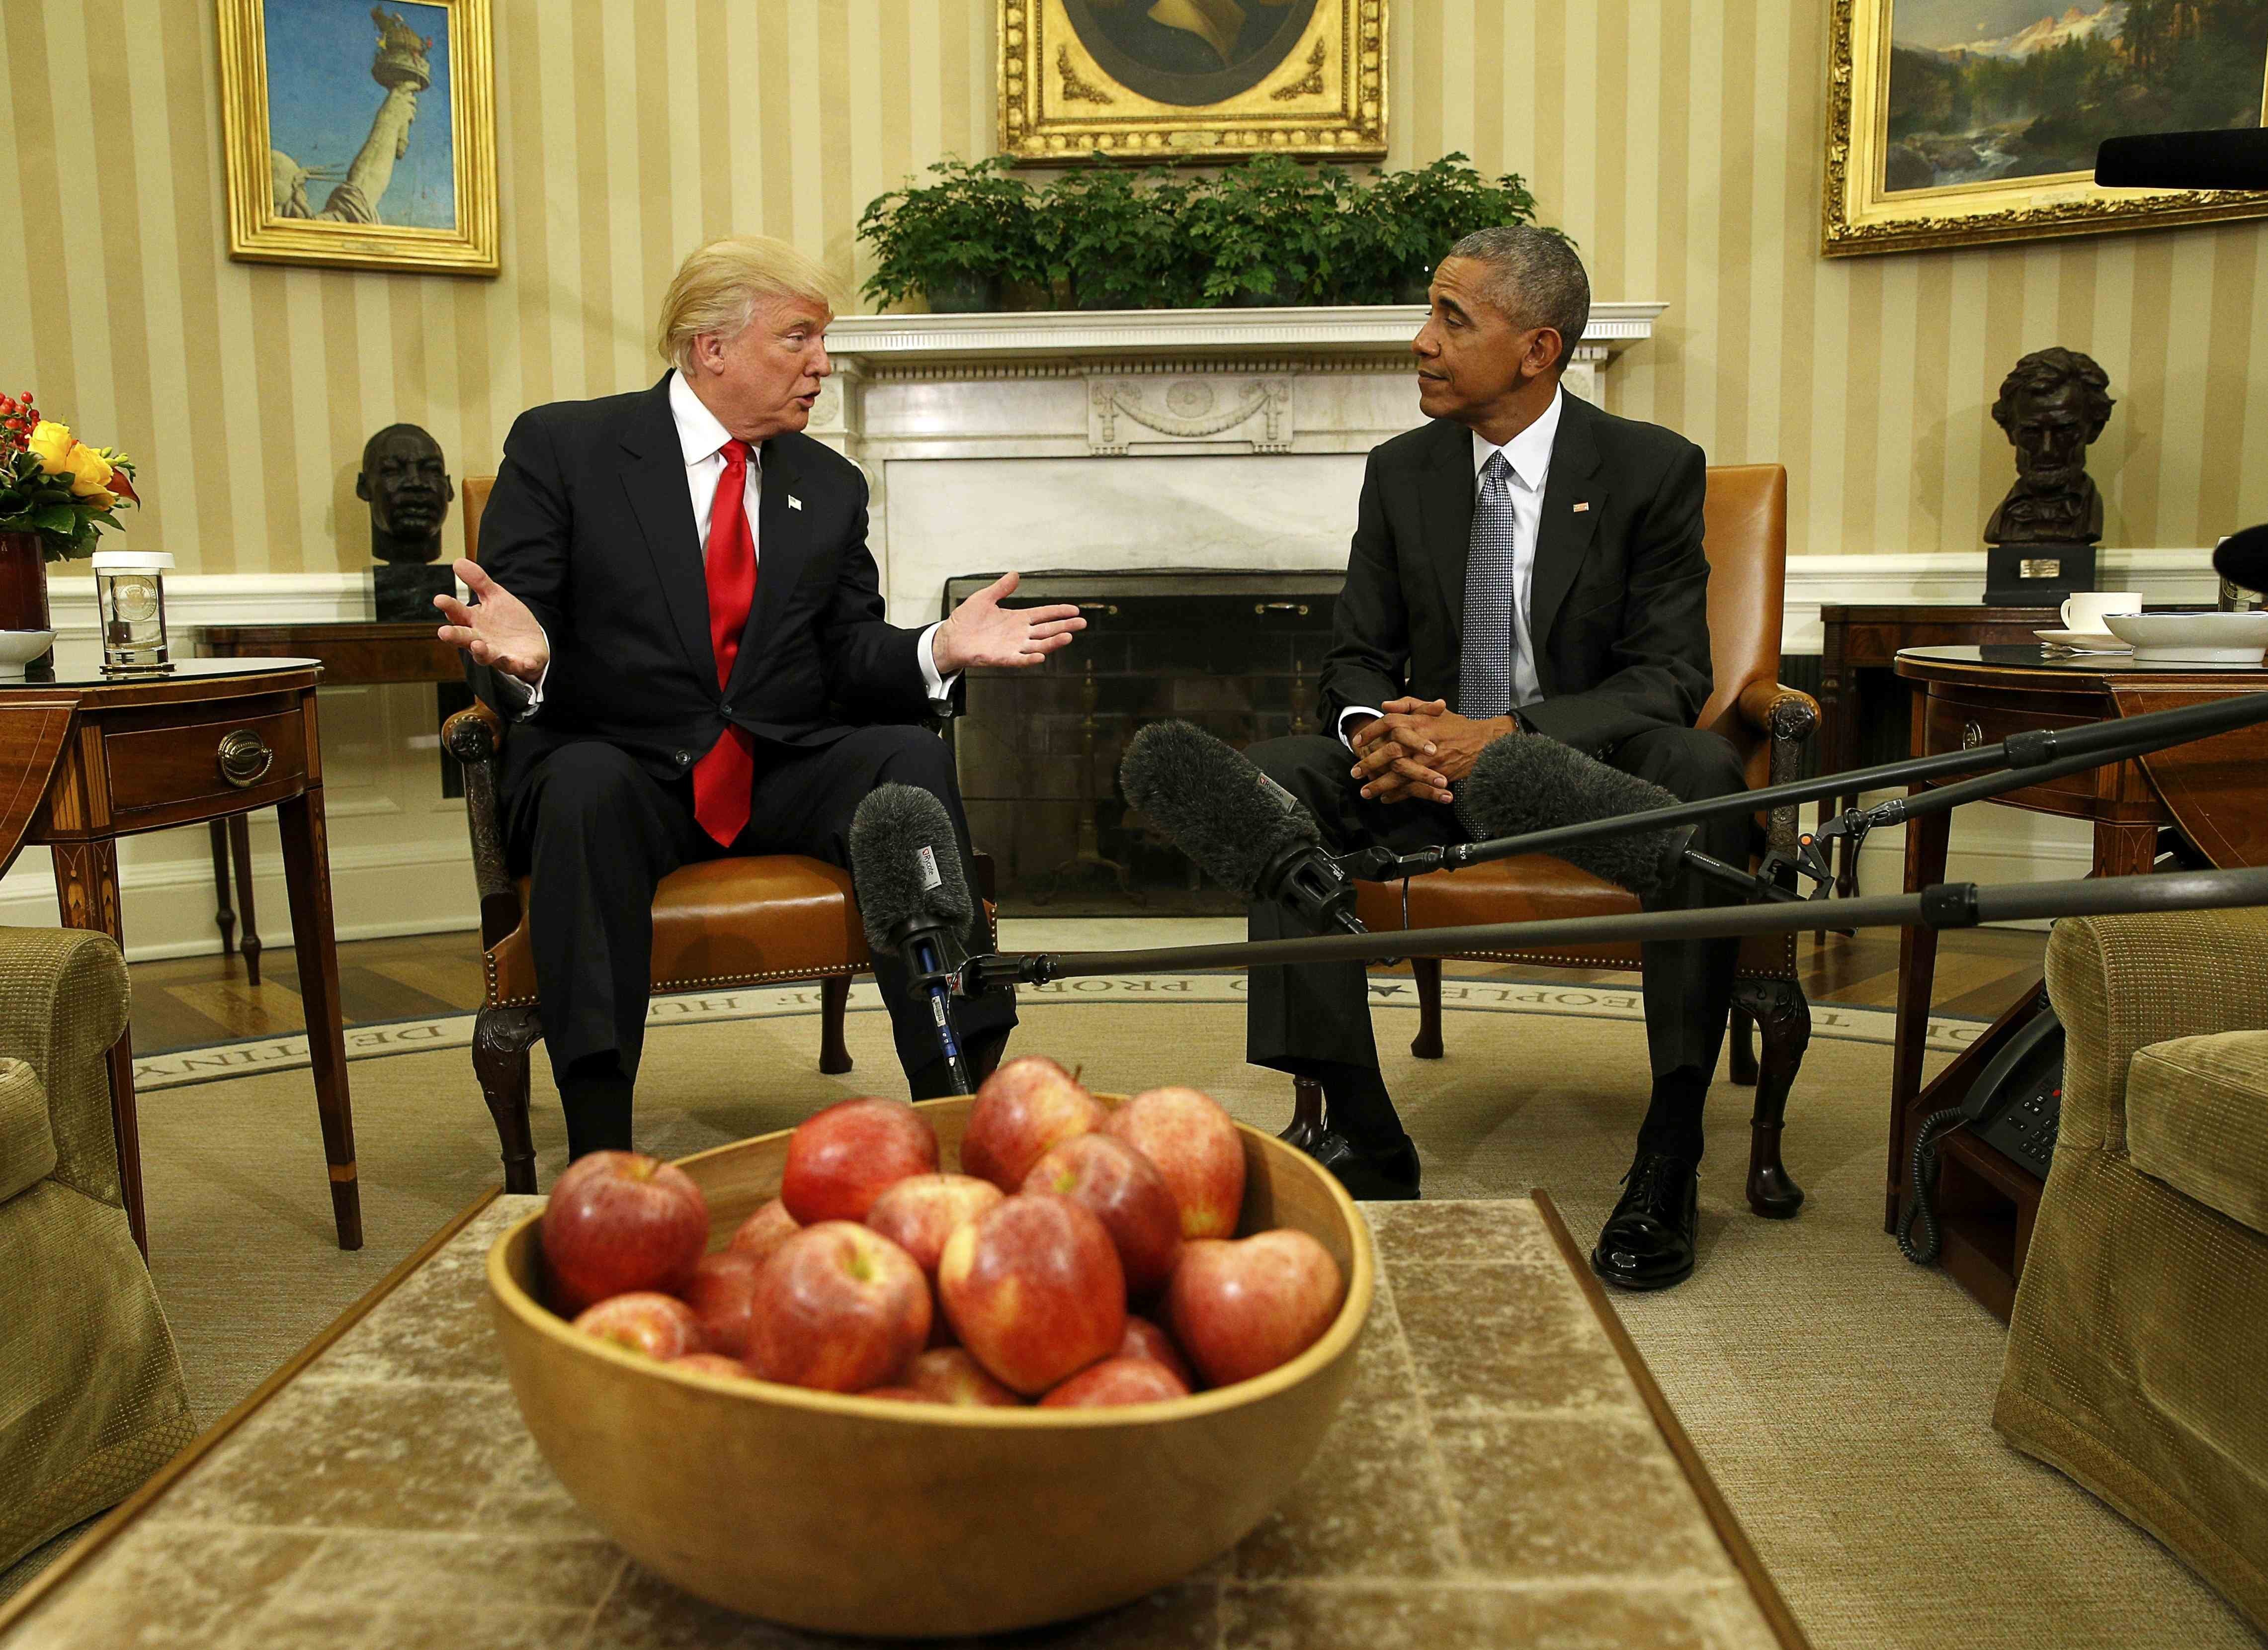 US President Barack Obama meets with President-elect Donald Trump to discuss transition plans in the White House Oval Office in Washington, US, November 10, 2016.